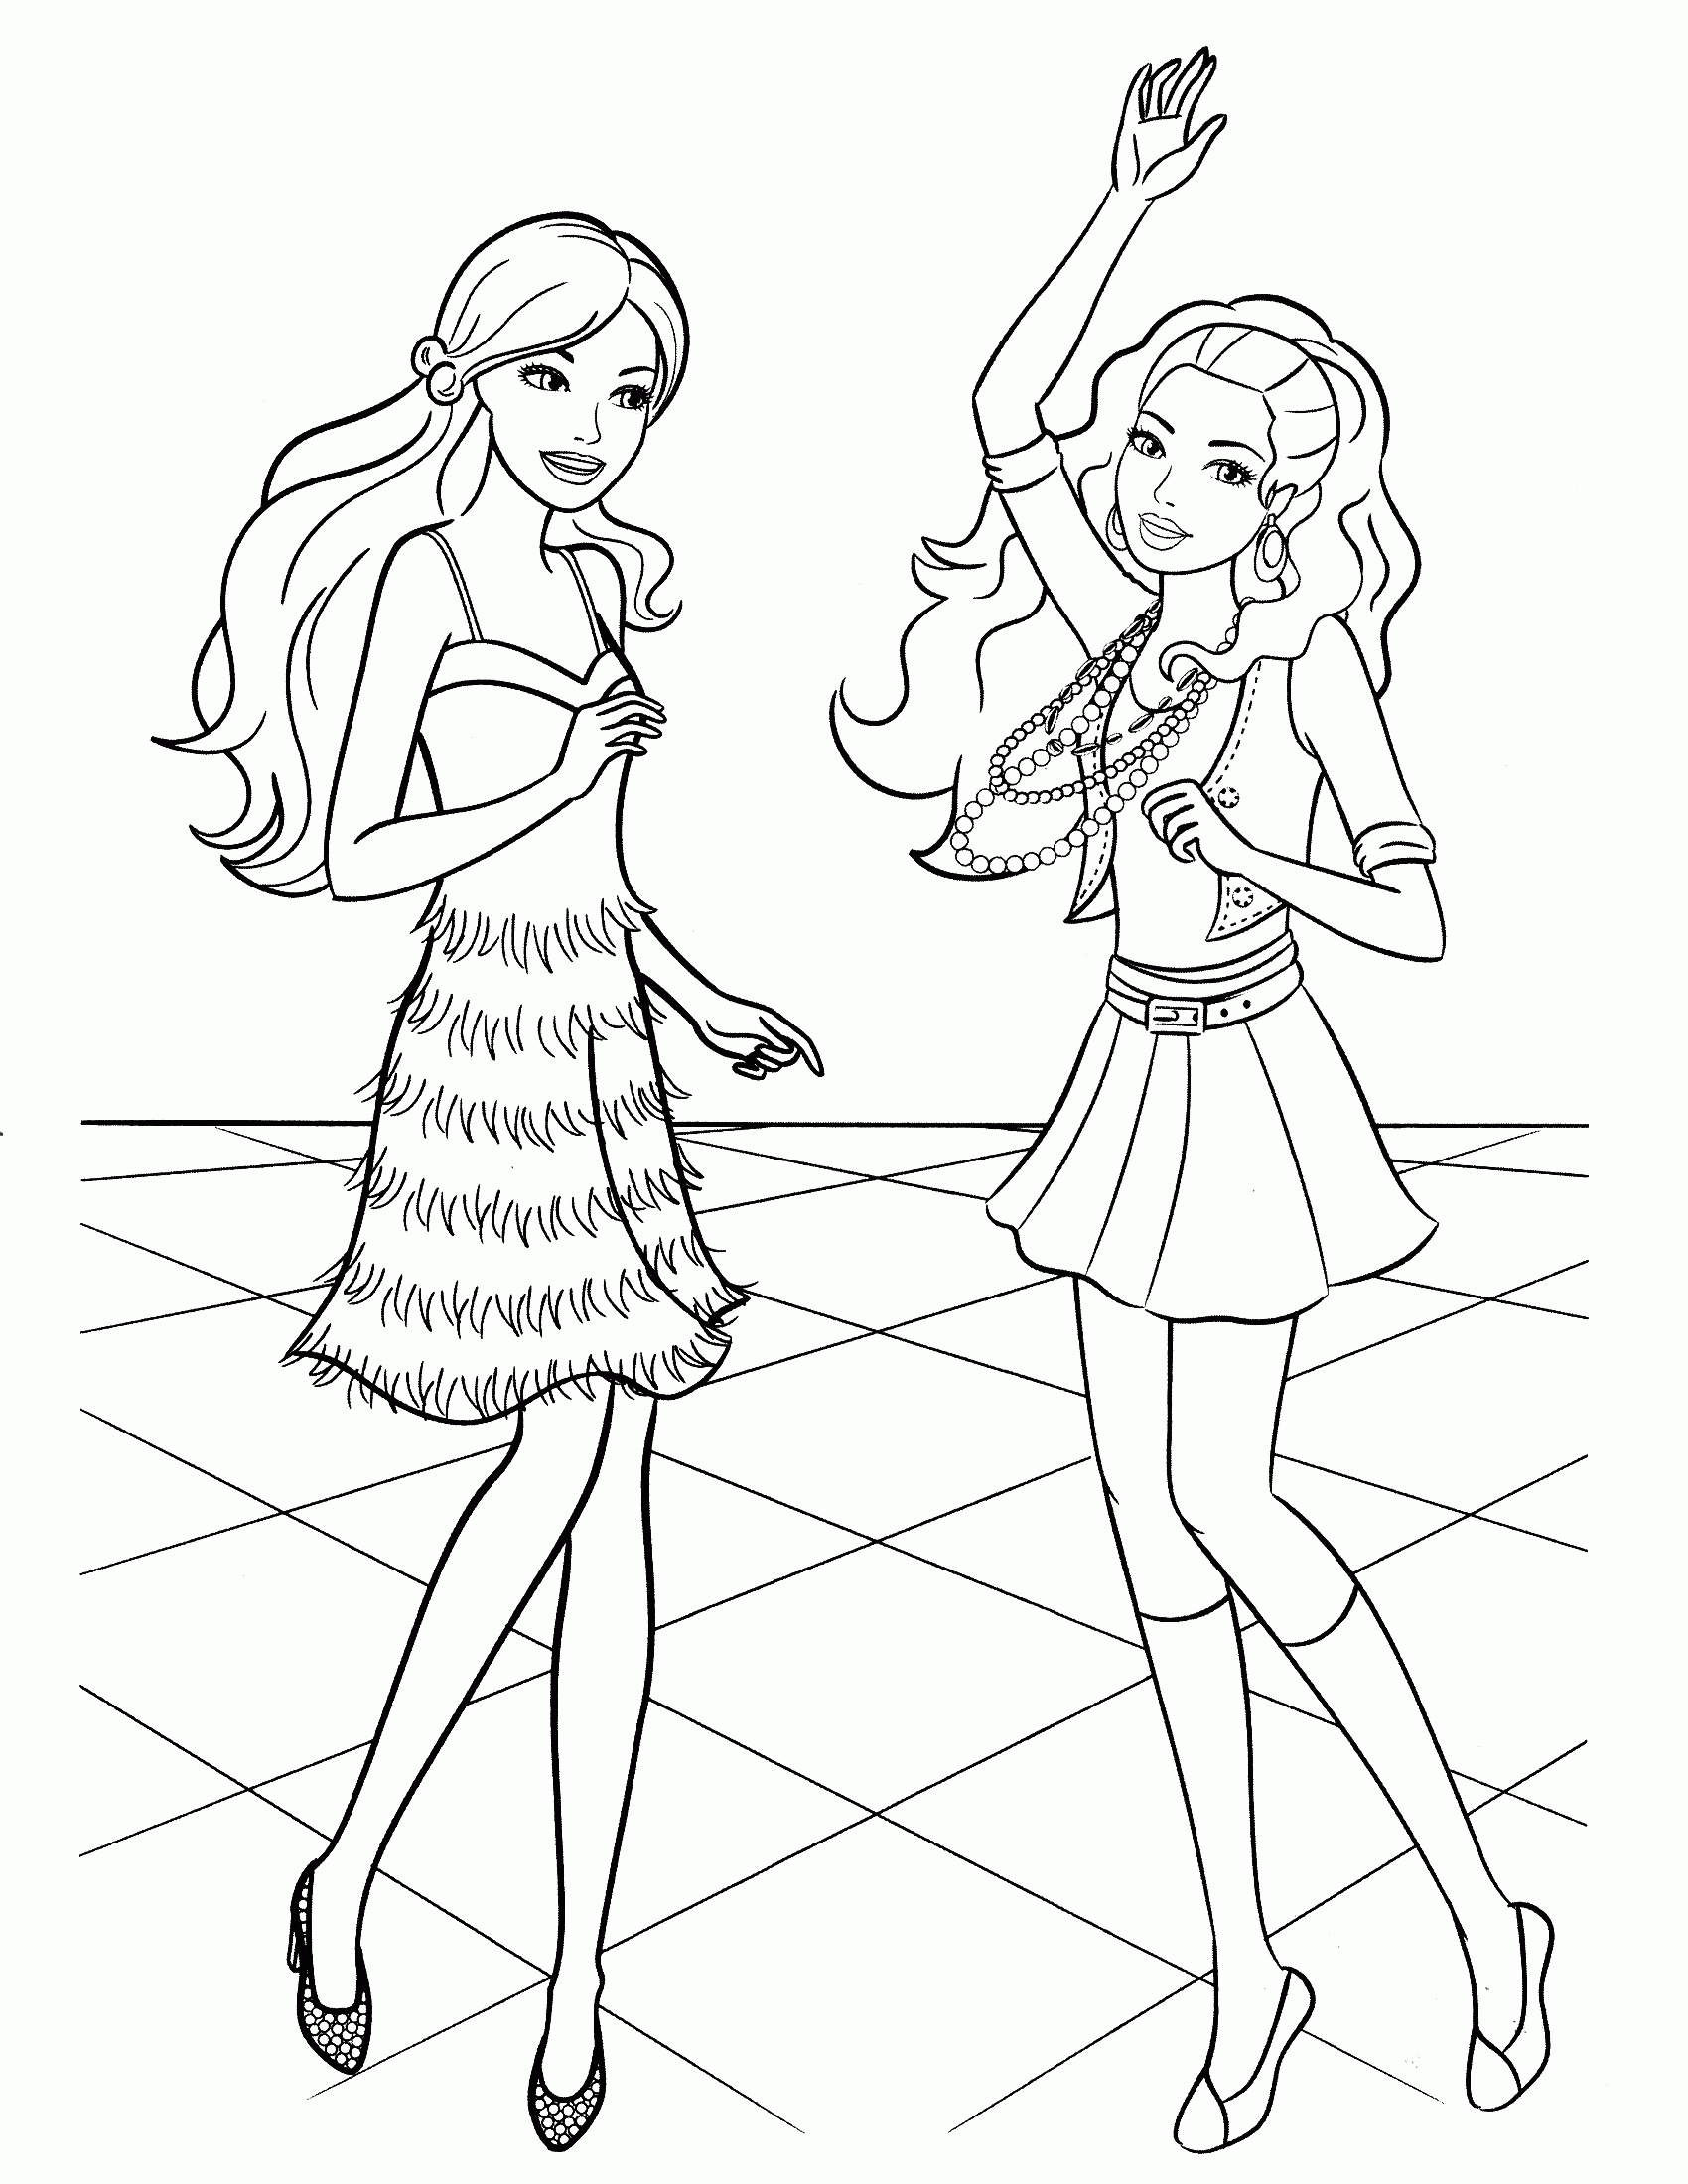 Boy Barbie Coloring Pages For Girls   Coloring Pages For All Ages ...